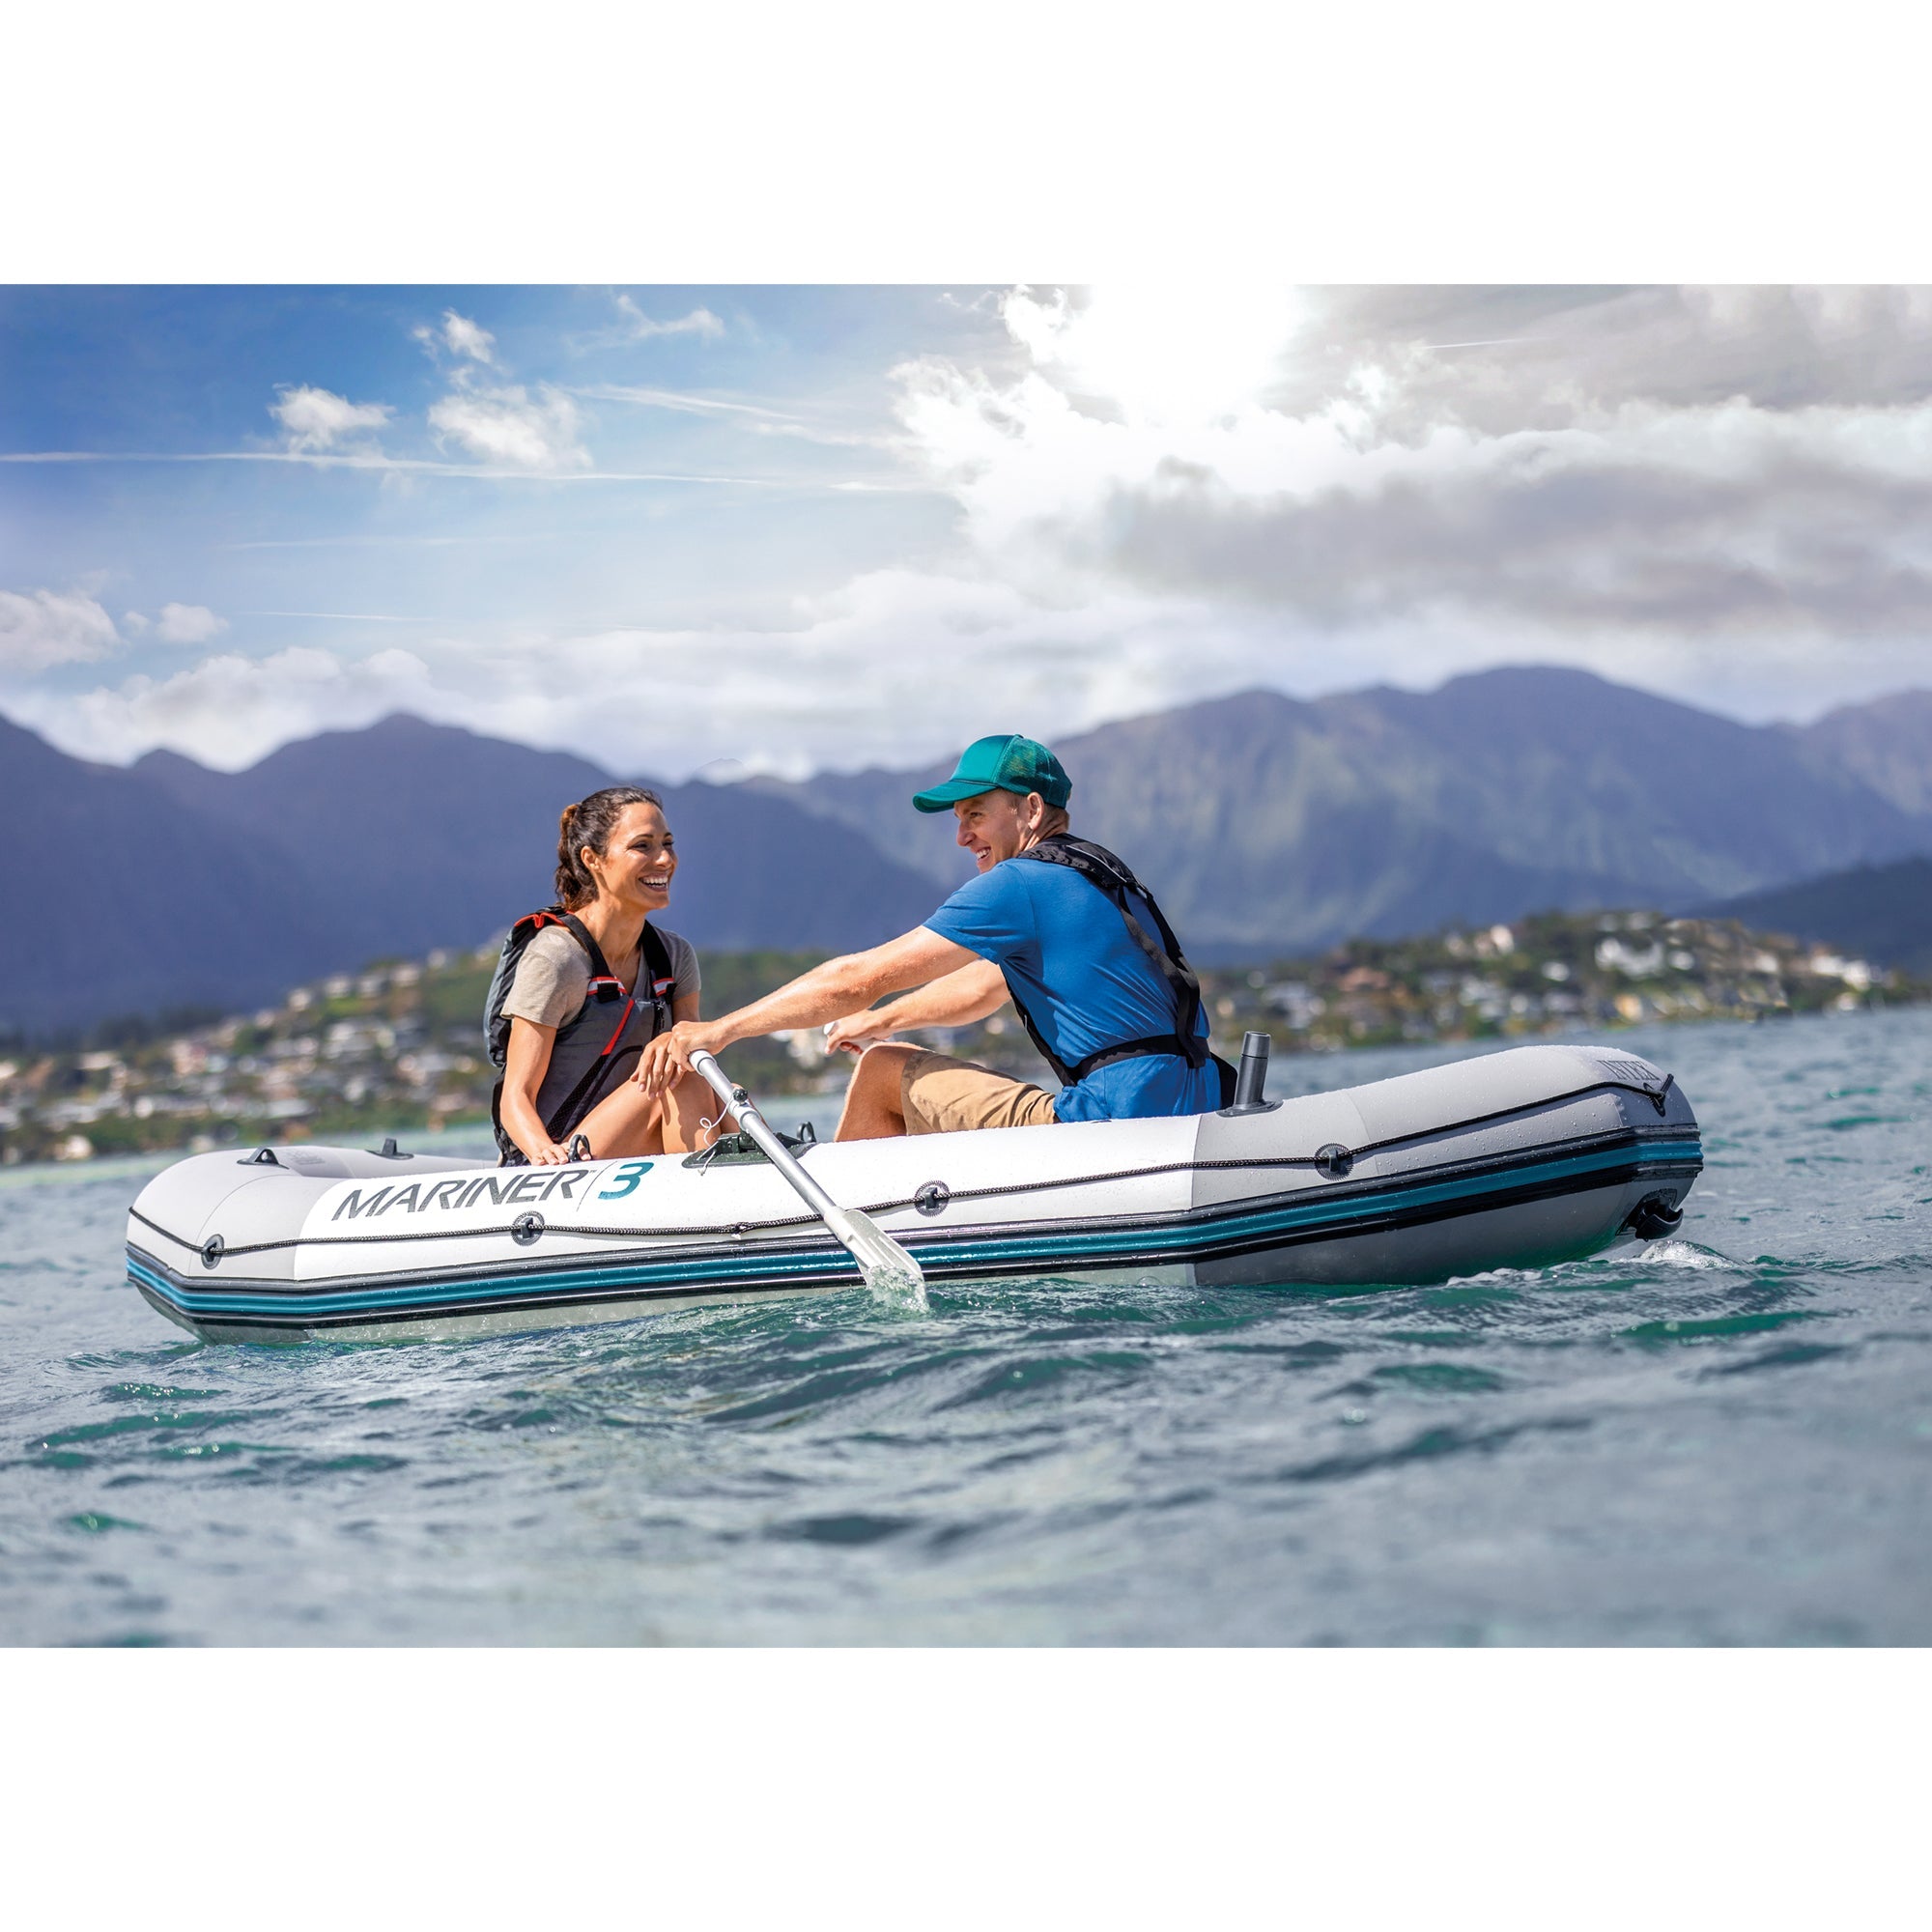 Intex Mariner 4-Person Inflatable River Lake Dinghy Boat with Pump